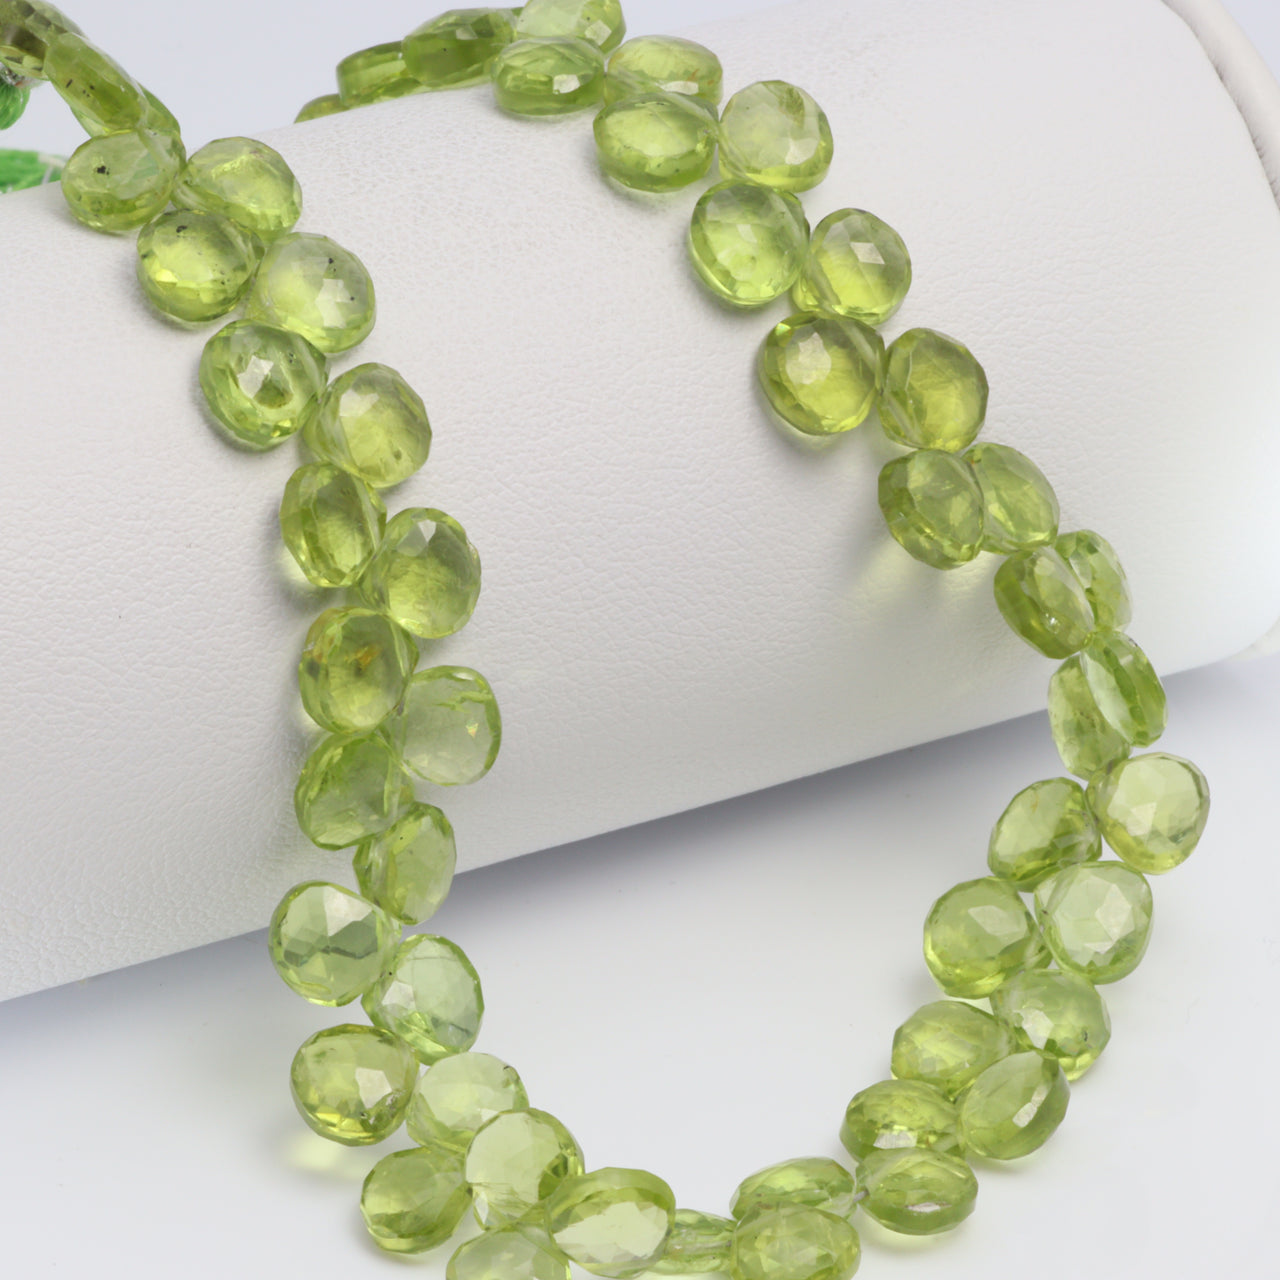 Green Peridot 6mm Faceted Heart Shaped Briolettes